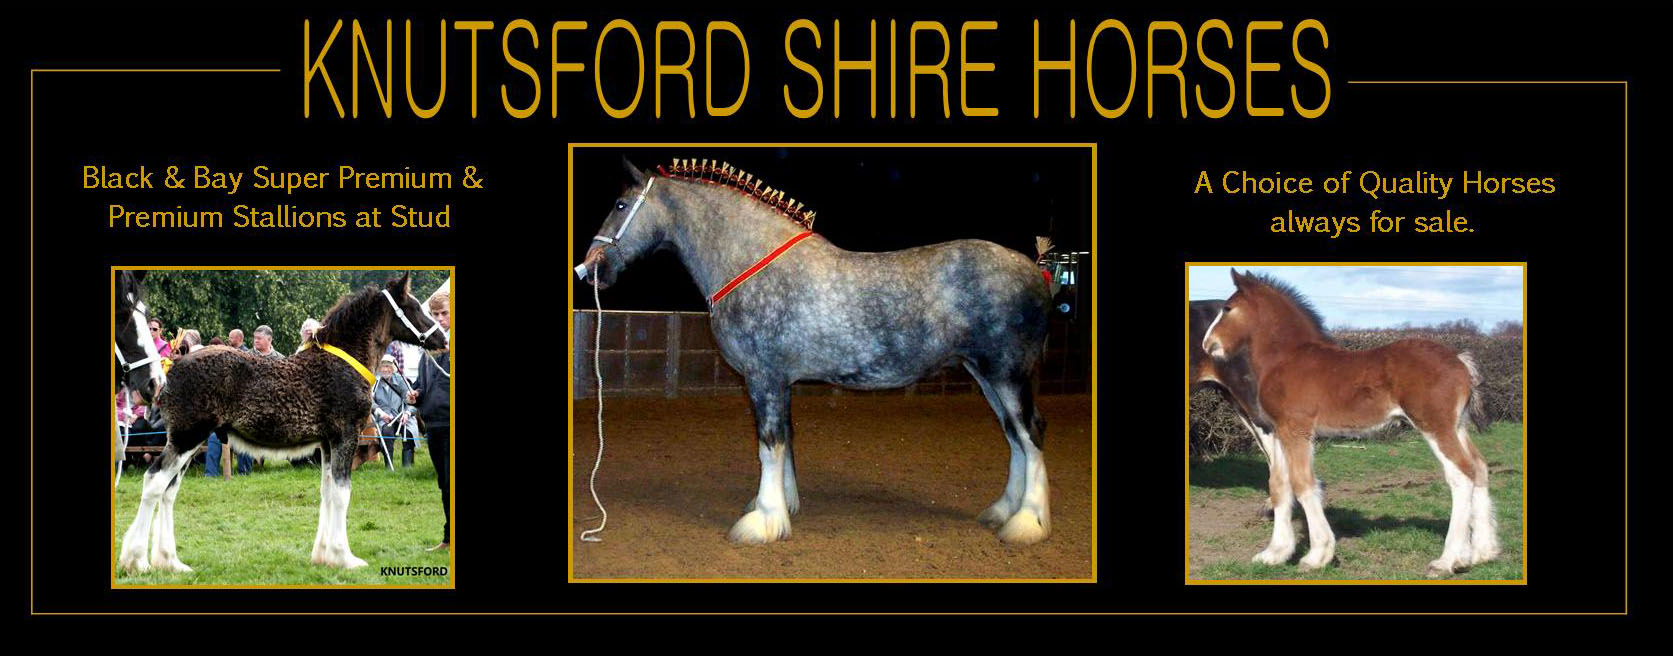 Shire Horse For Sale - Knutsford Shire Horses, Manchester